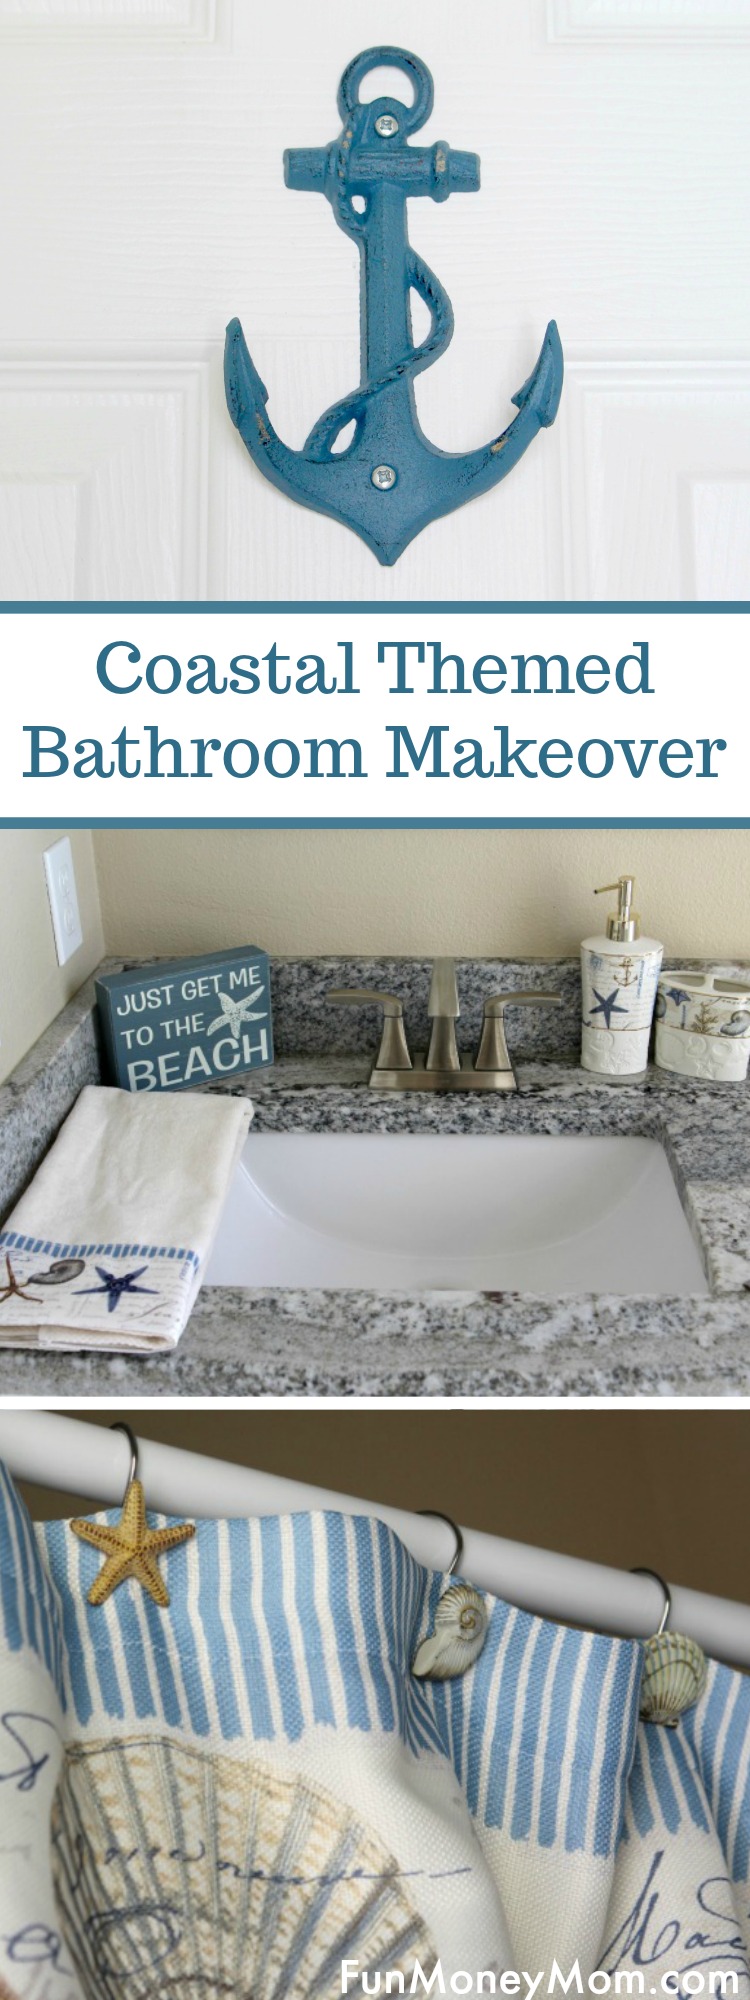 Coastal Themed Bathroom Makeover - Want to remodel your bathroom with a coastal theme? With the right coastal themed accessories and a little cleaning, your bathroom upgrade will be amazing! #ad #DGSpringCleanEssentials #bathroom makeover #remodel